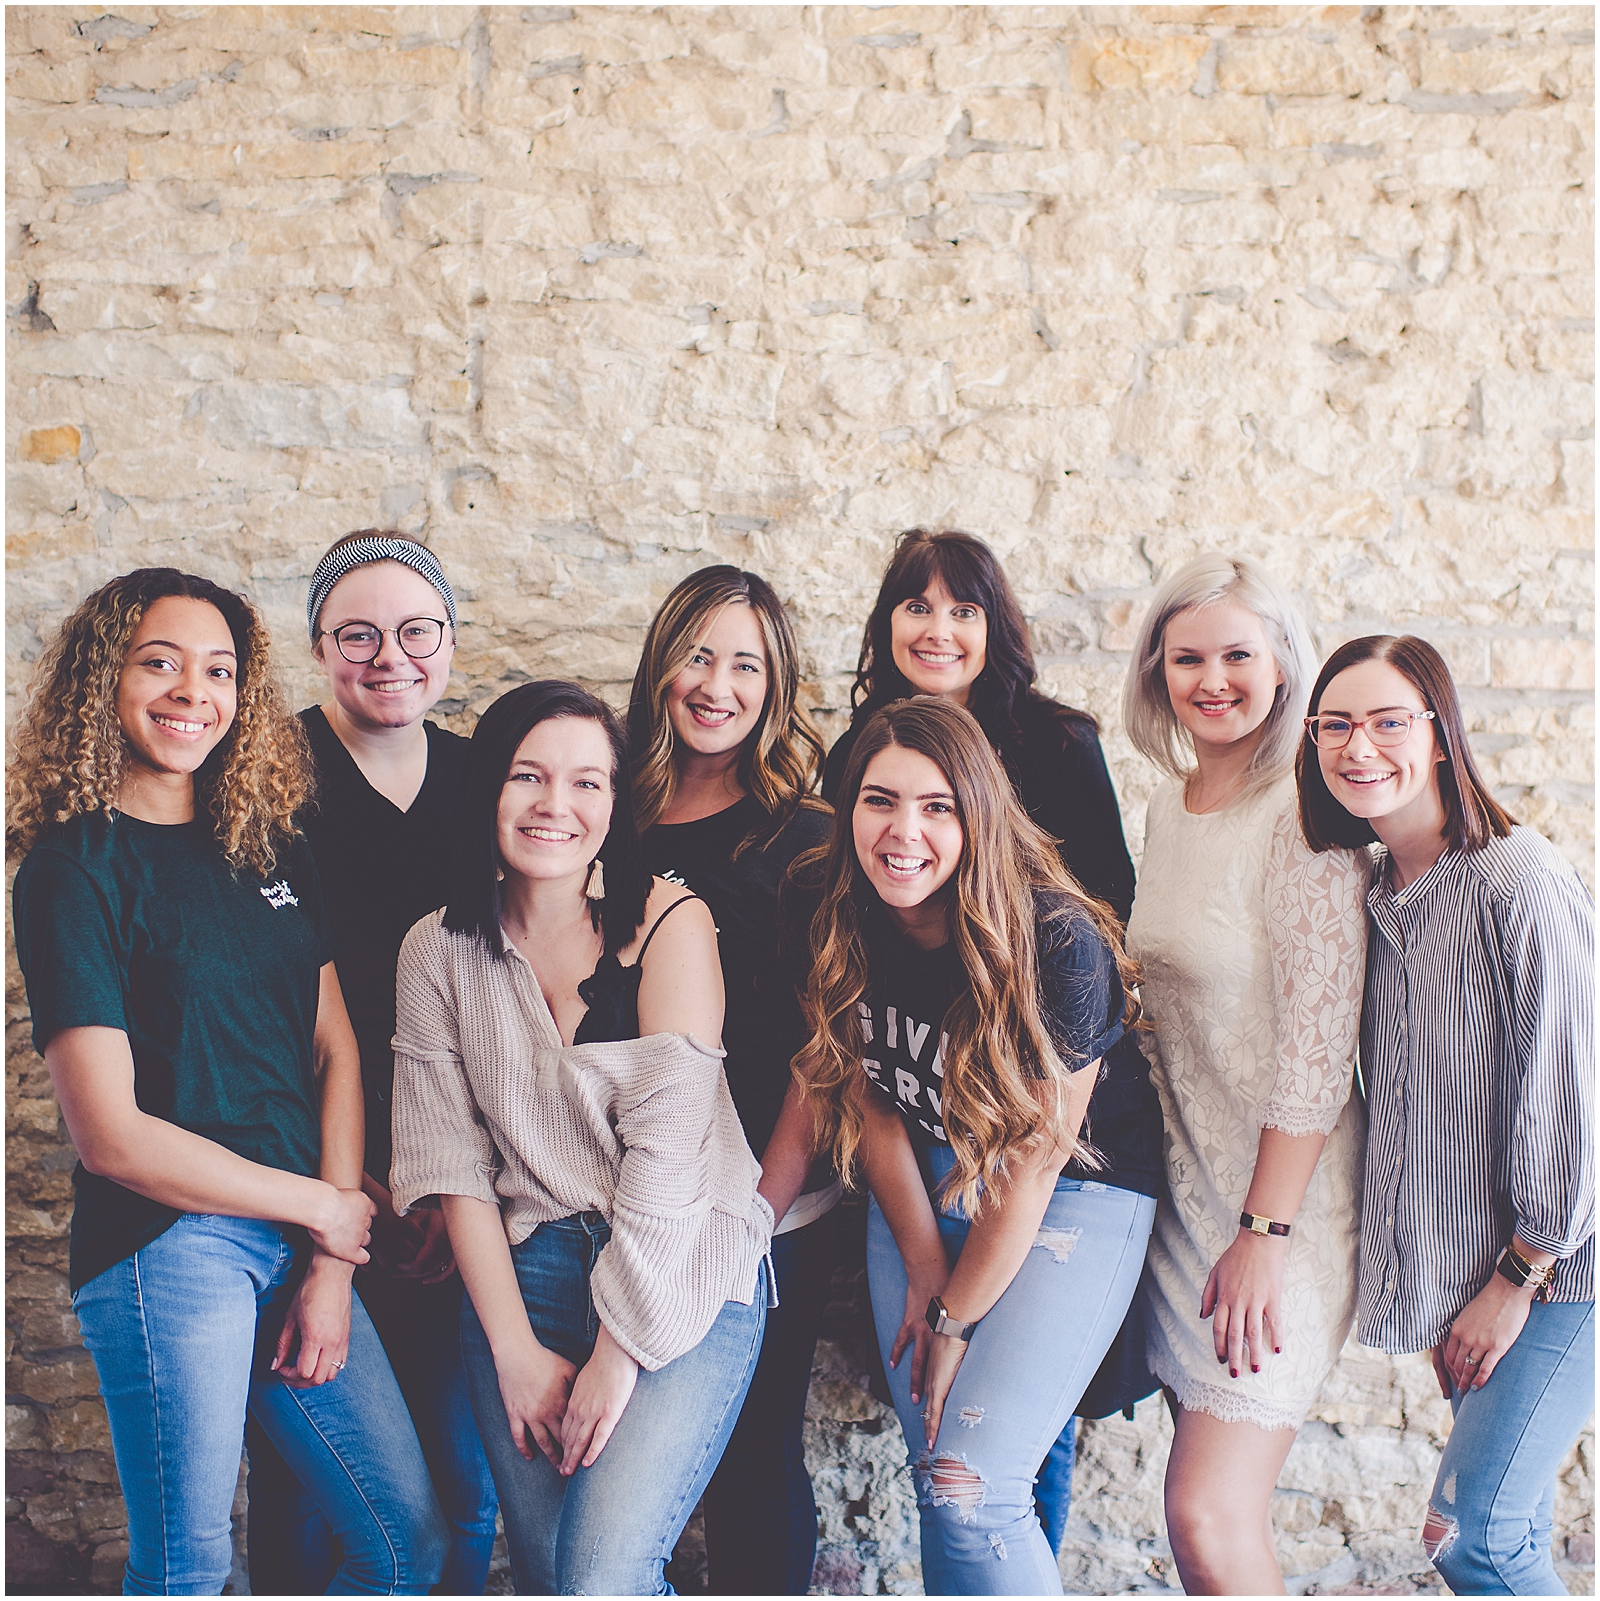 How to Meet Other Creatives in Your Industry - advice from Chicagoland wedding photographer and mentor for creatives Kara Evans Photographer.